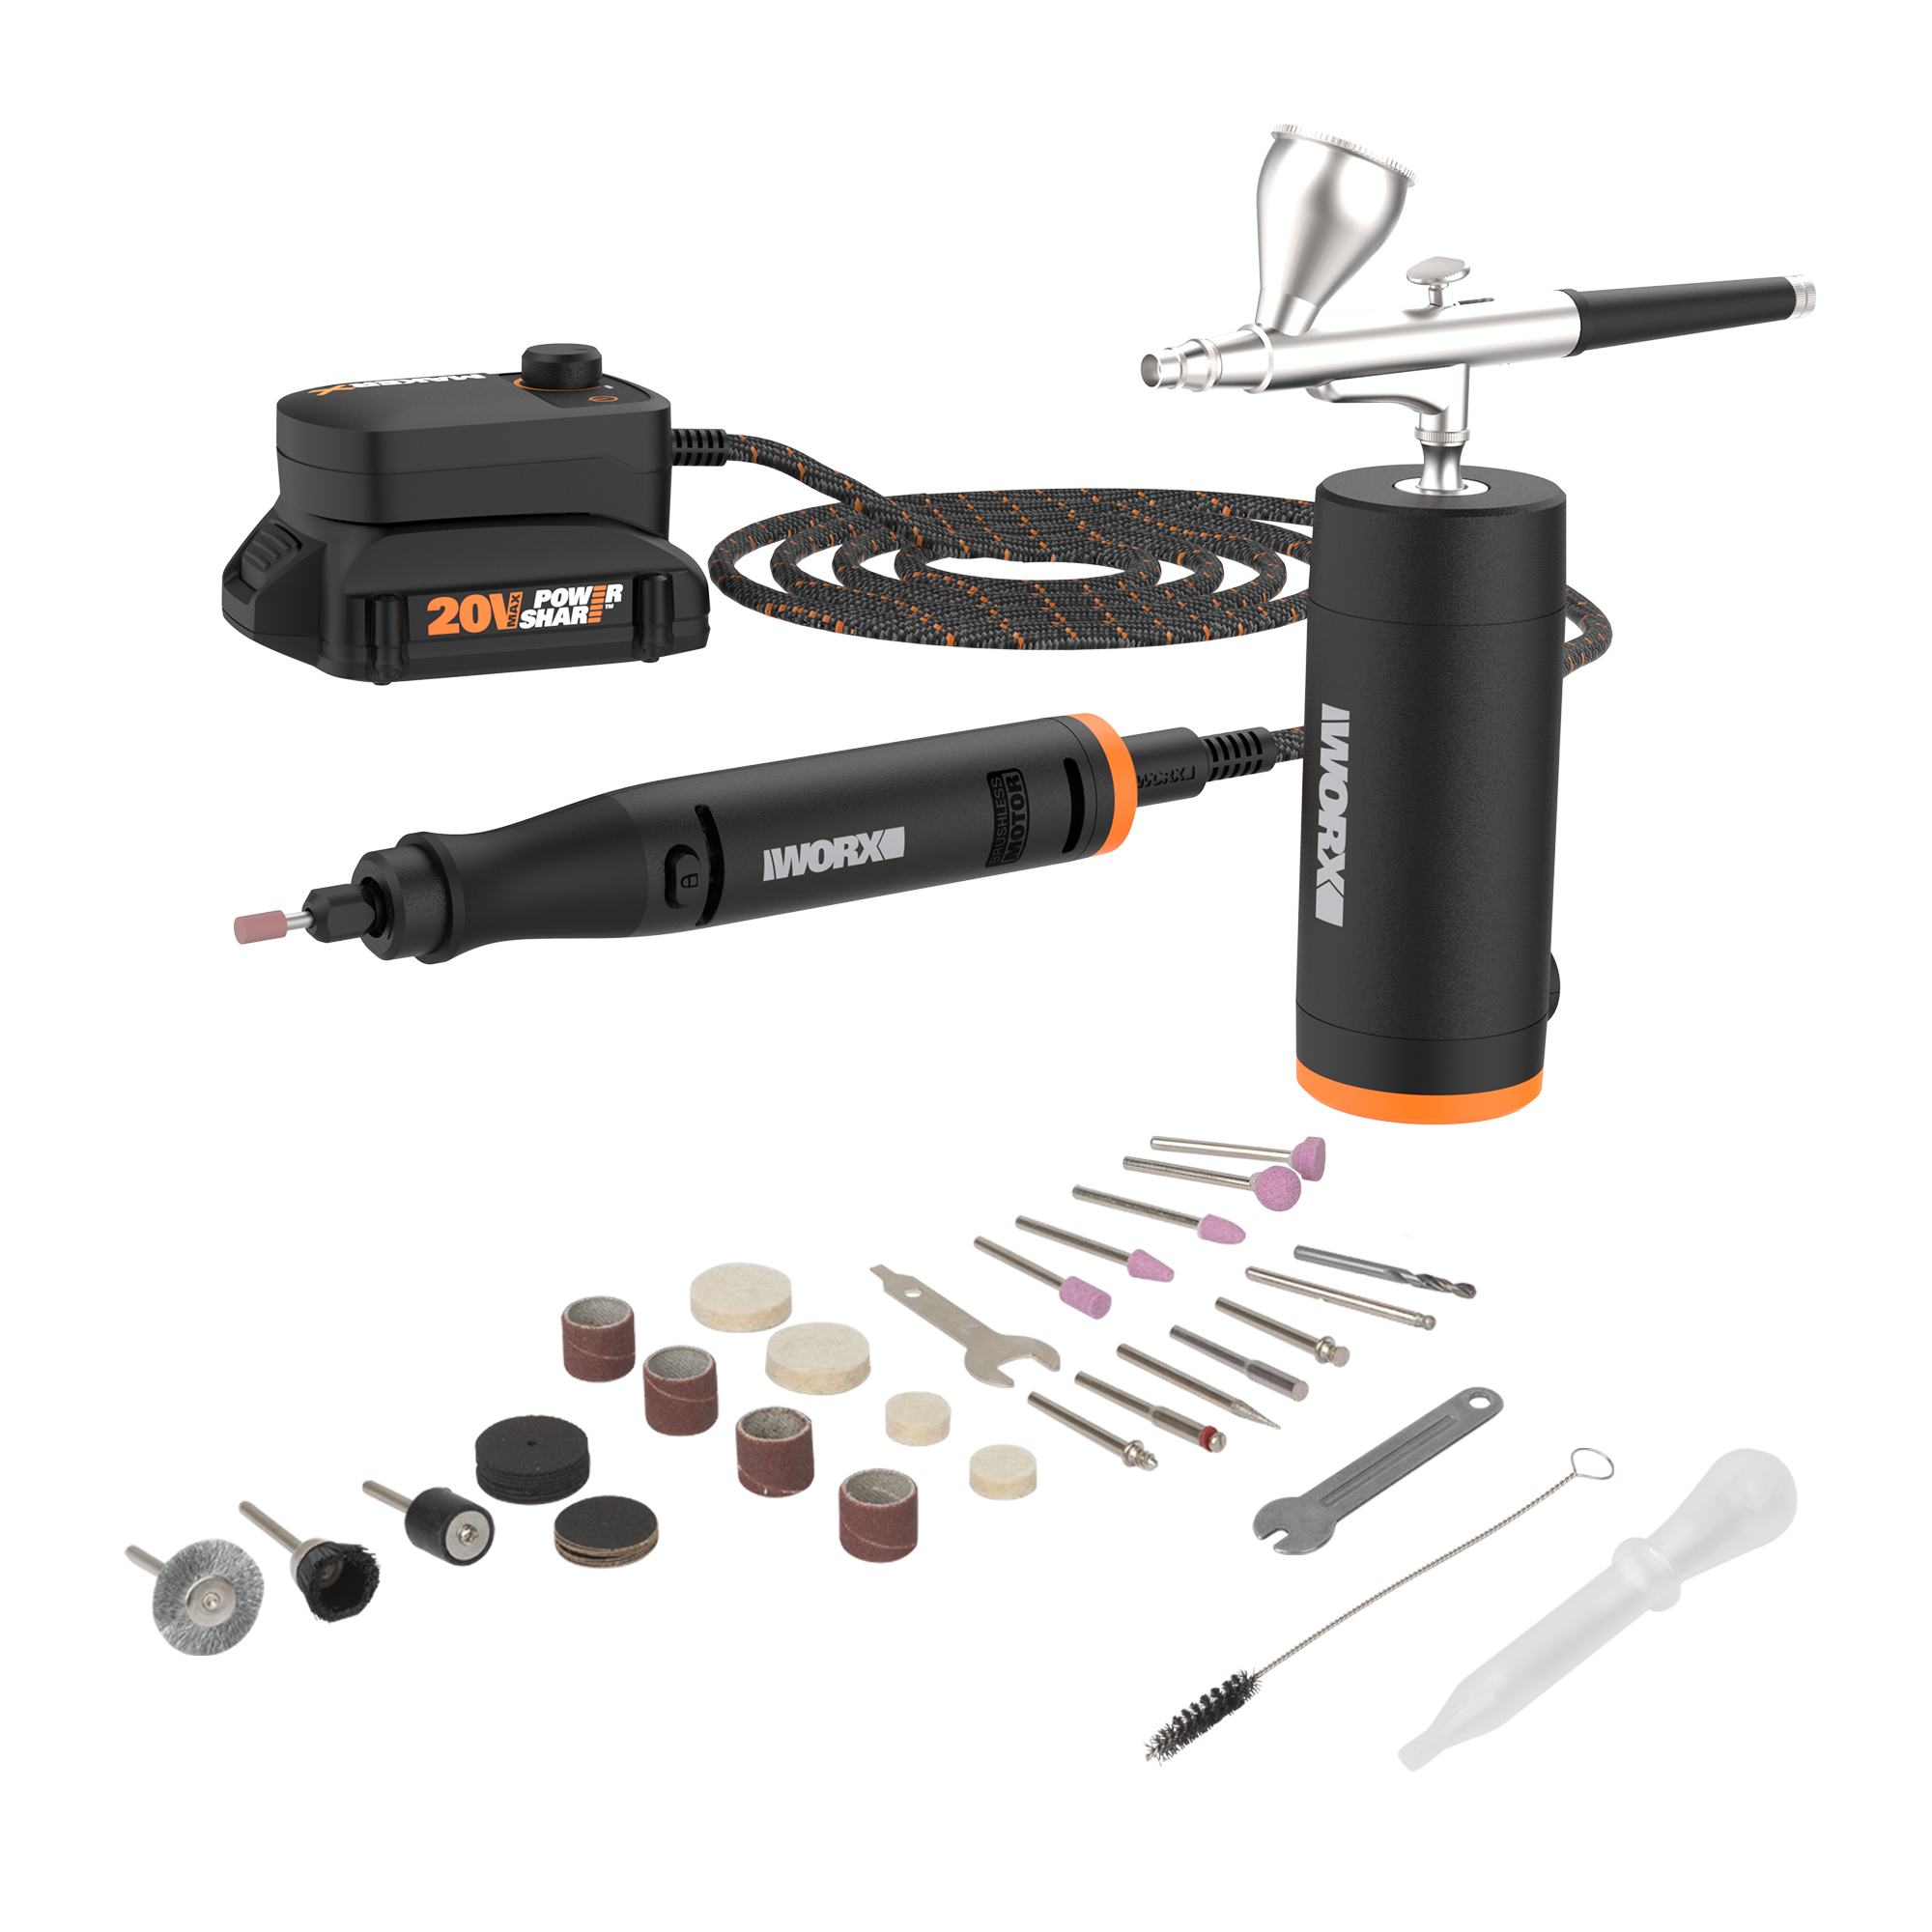 WORX 20V MakerX Rotary Tool and Airbrush Combo Kit includes MakerX Hub, 20V Power Share battery, 45 accessories with case, charger and storage bag.